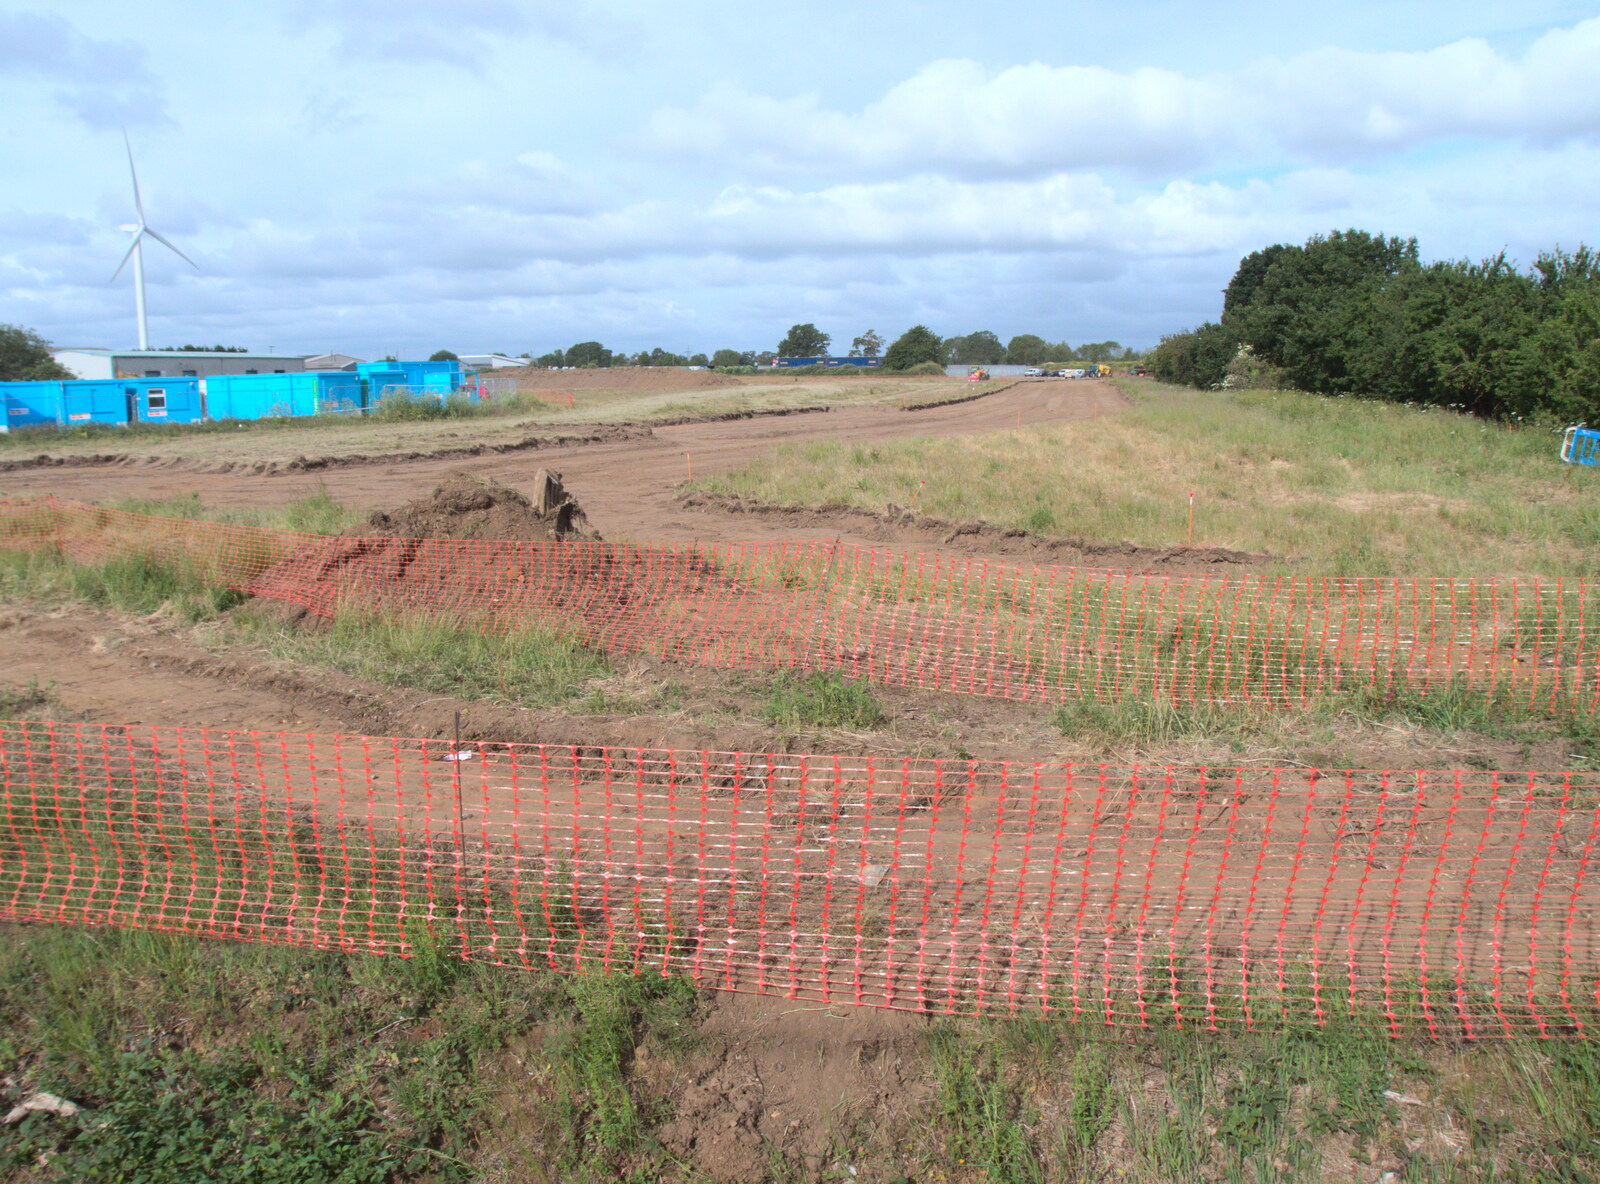 A wide view of the new road from The Old Brickworks and a New Road, Hoxne and Eye, Suffolk - 26th May 2020